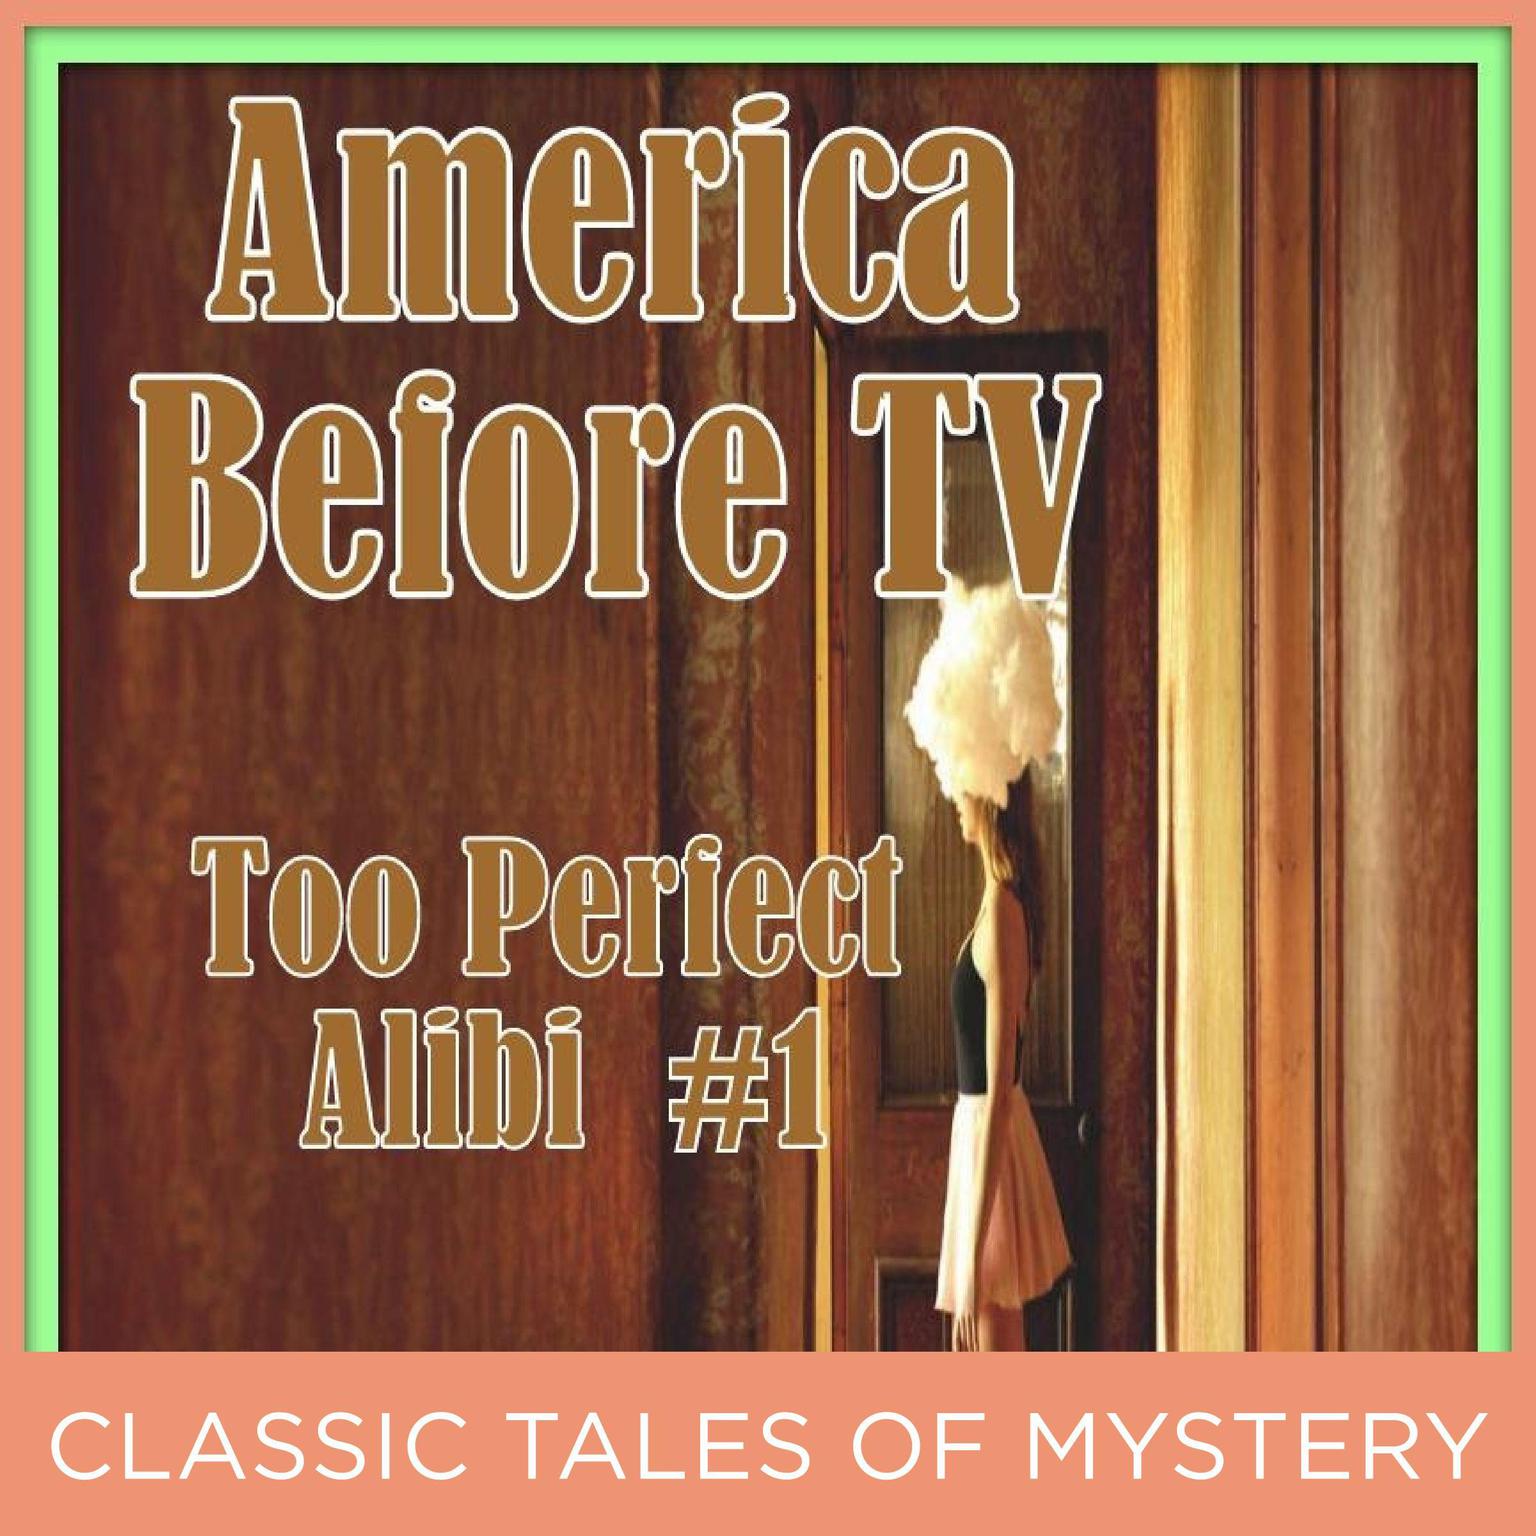 America Before TV - Too Perfect Alibi  #1 (Abridged) Audiobook, by Classic Tales of Mystery